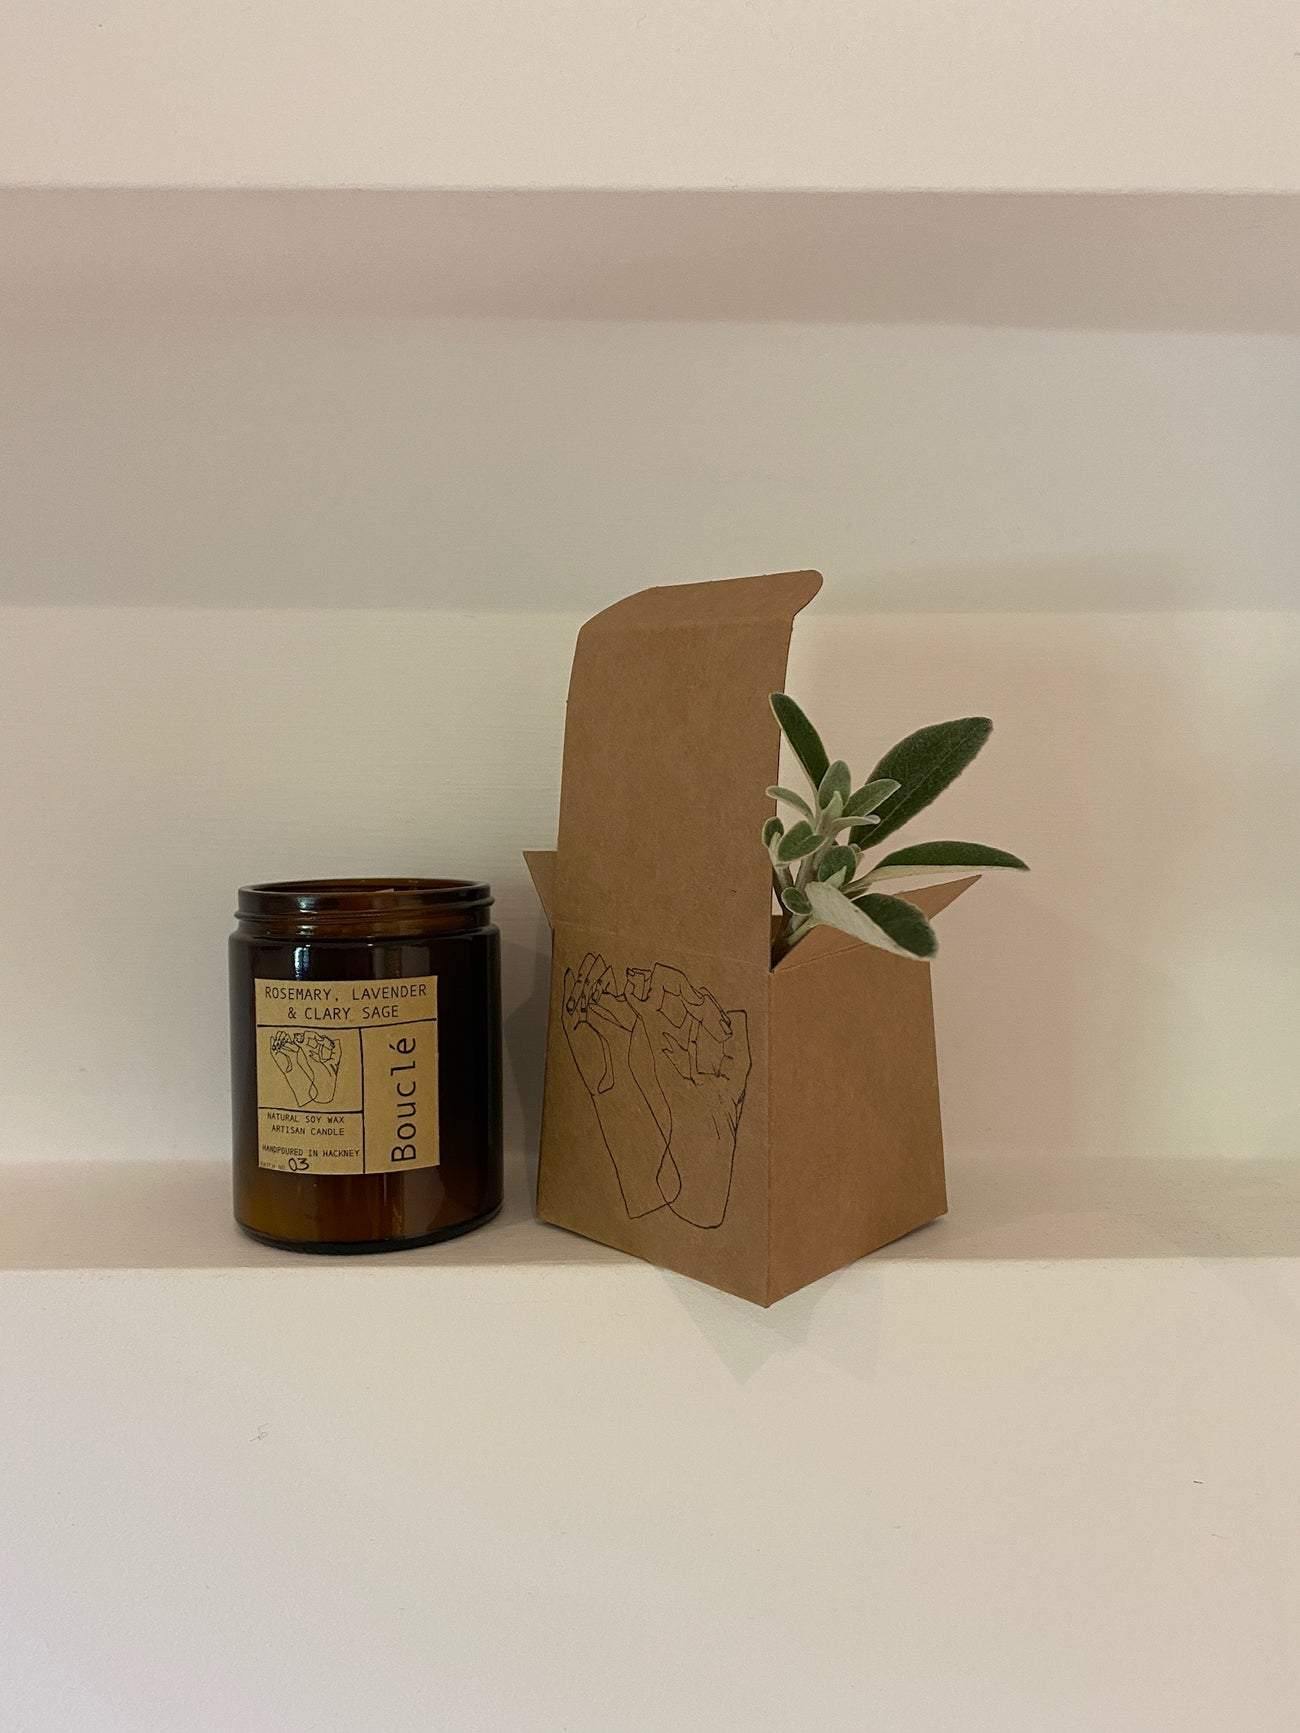 Lavender scented soy wax natural candle with plastic free recycled card packaging. Made using 100% pure essential oils in East London and Brighton